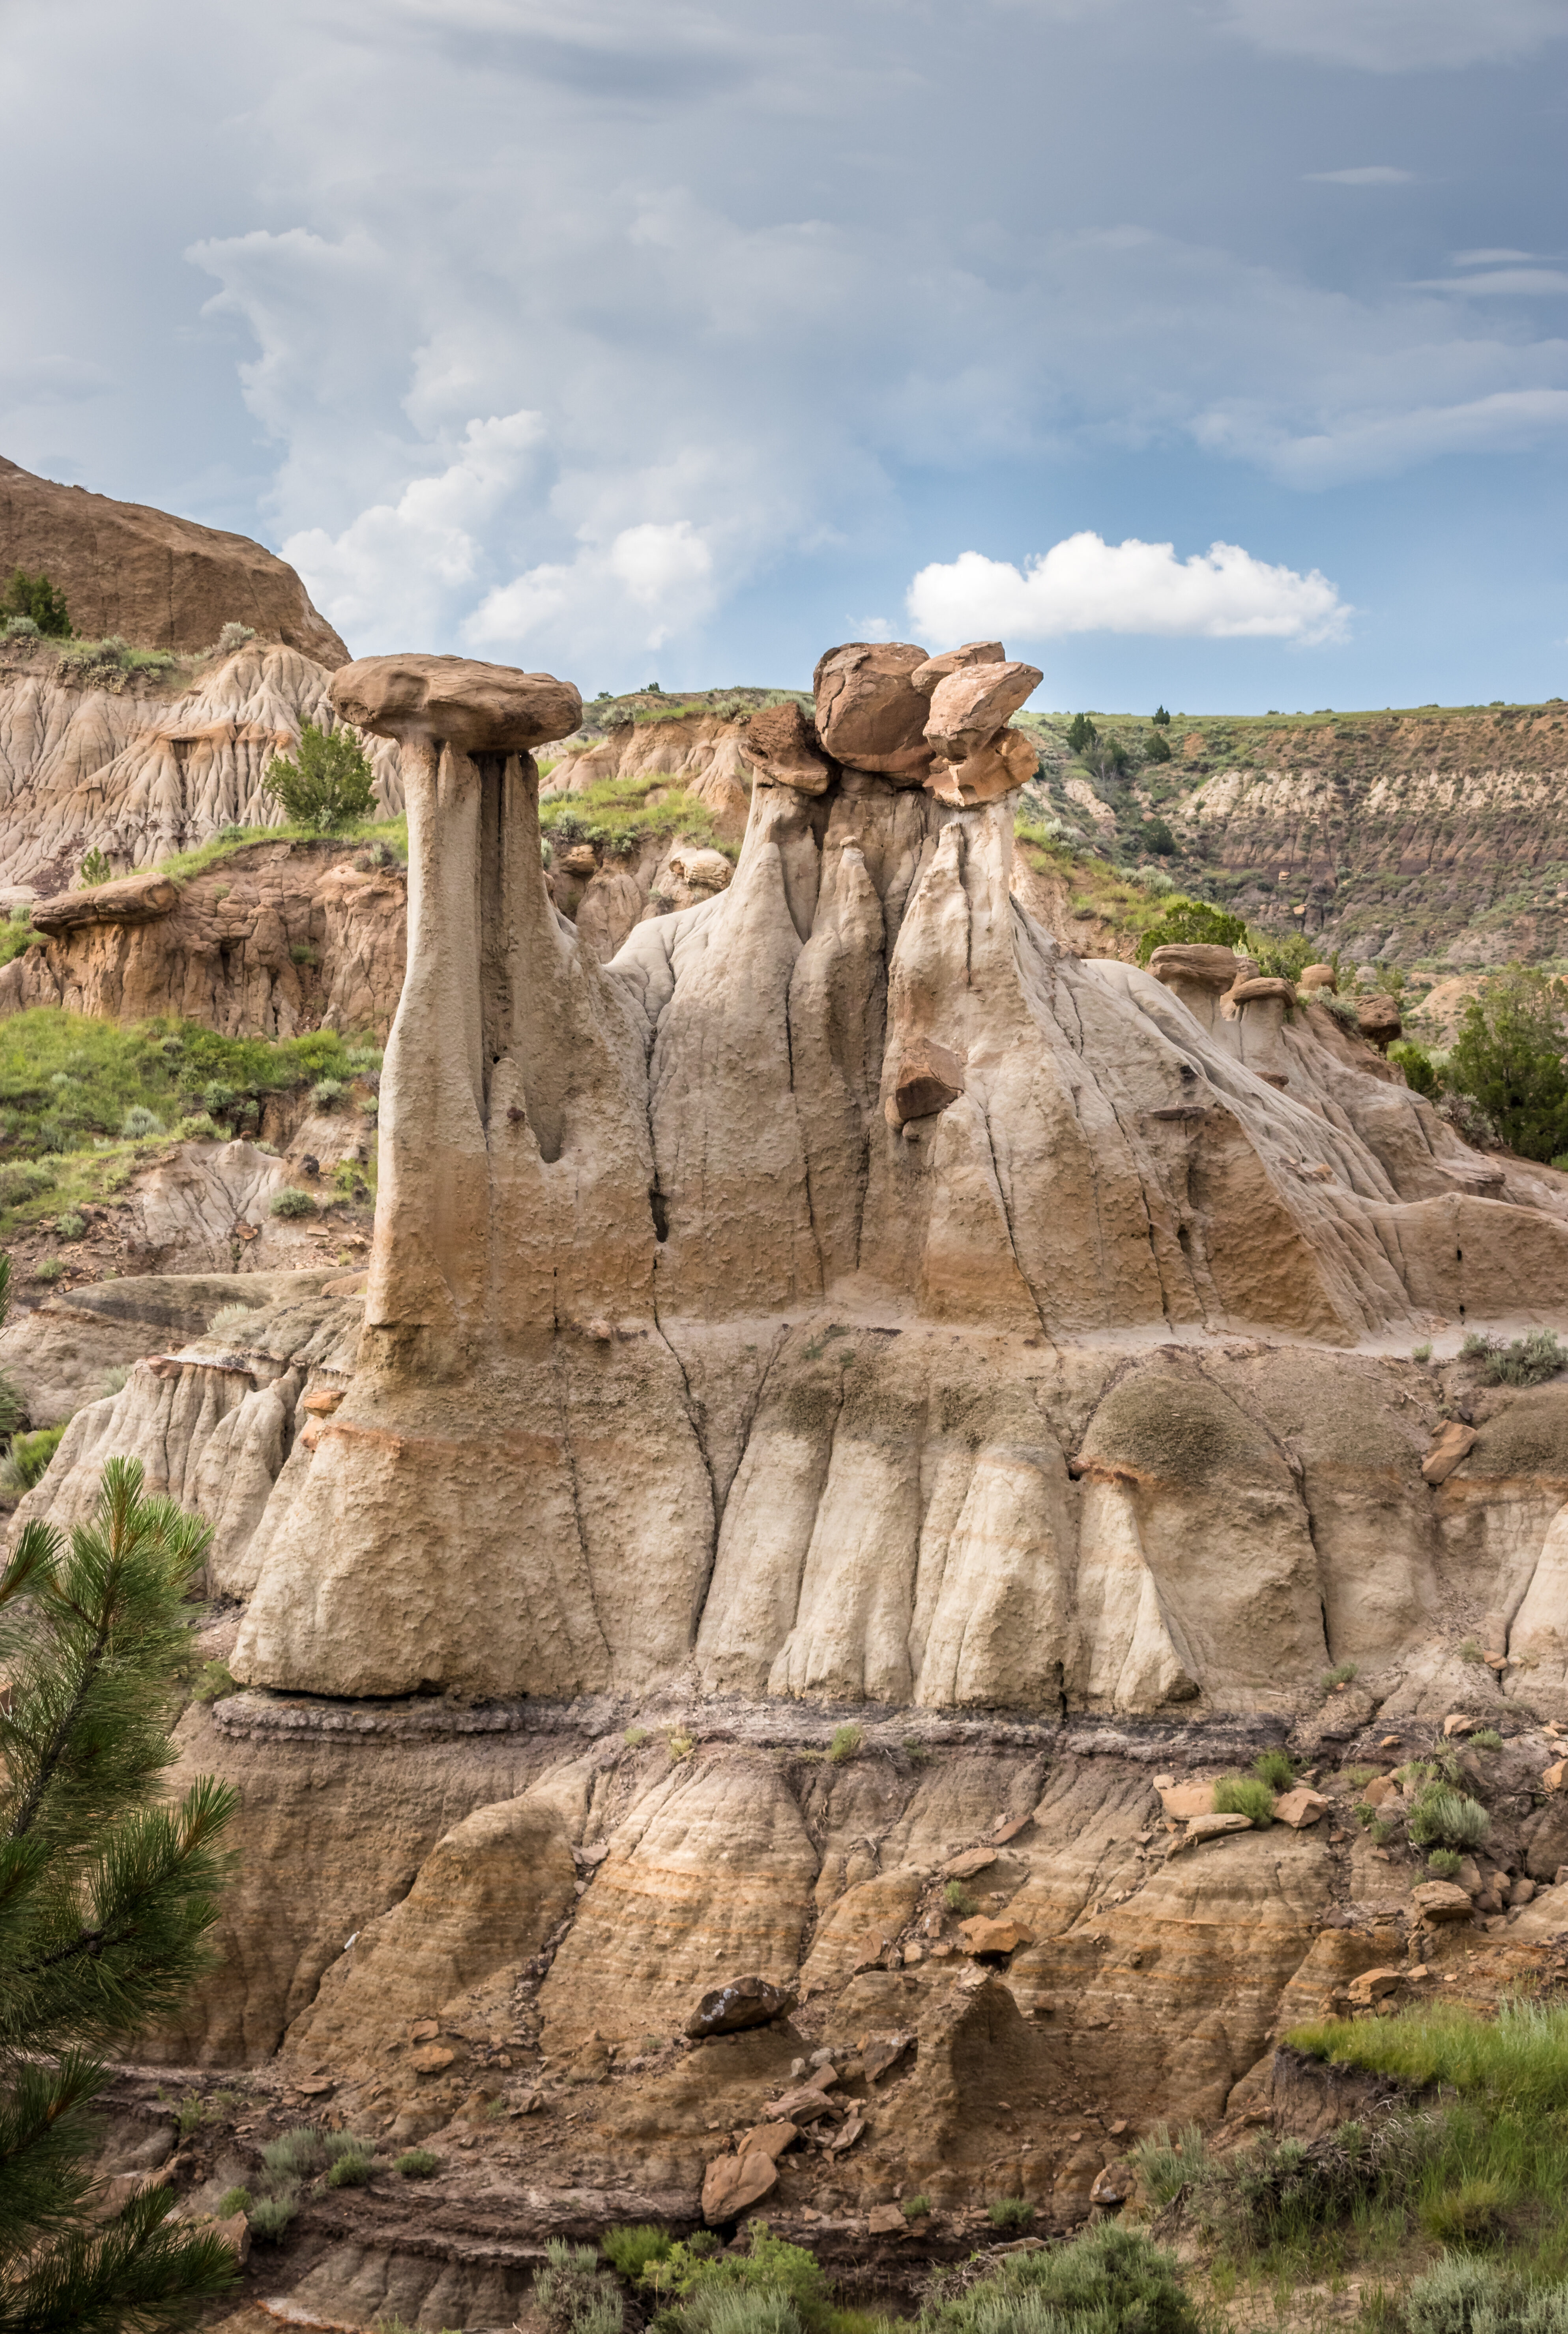  The Caprocks Trail provides an up-close view of some of Makoshika's strange and whimsical badland formations